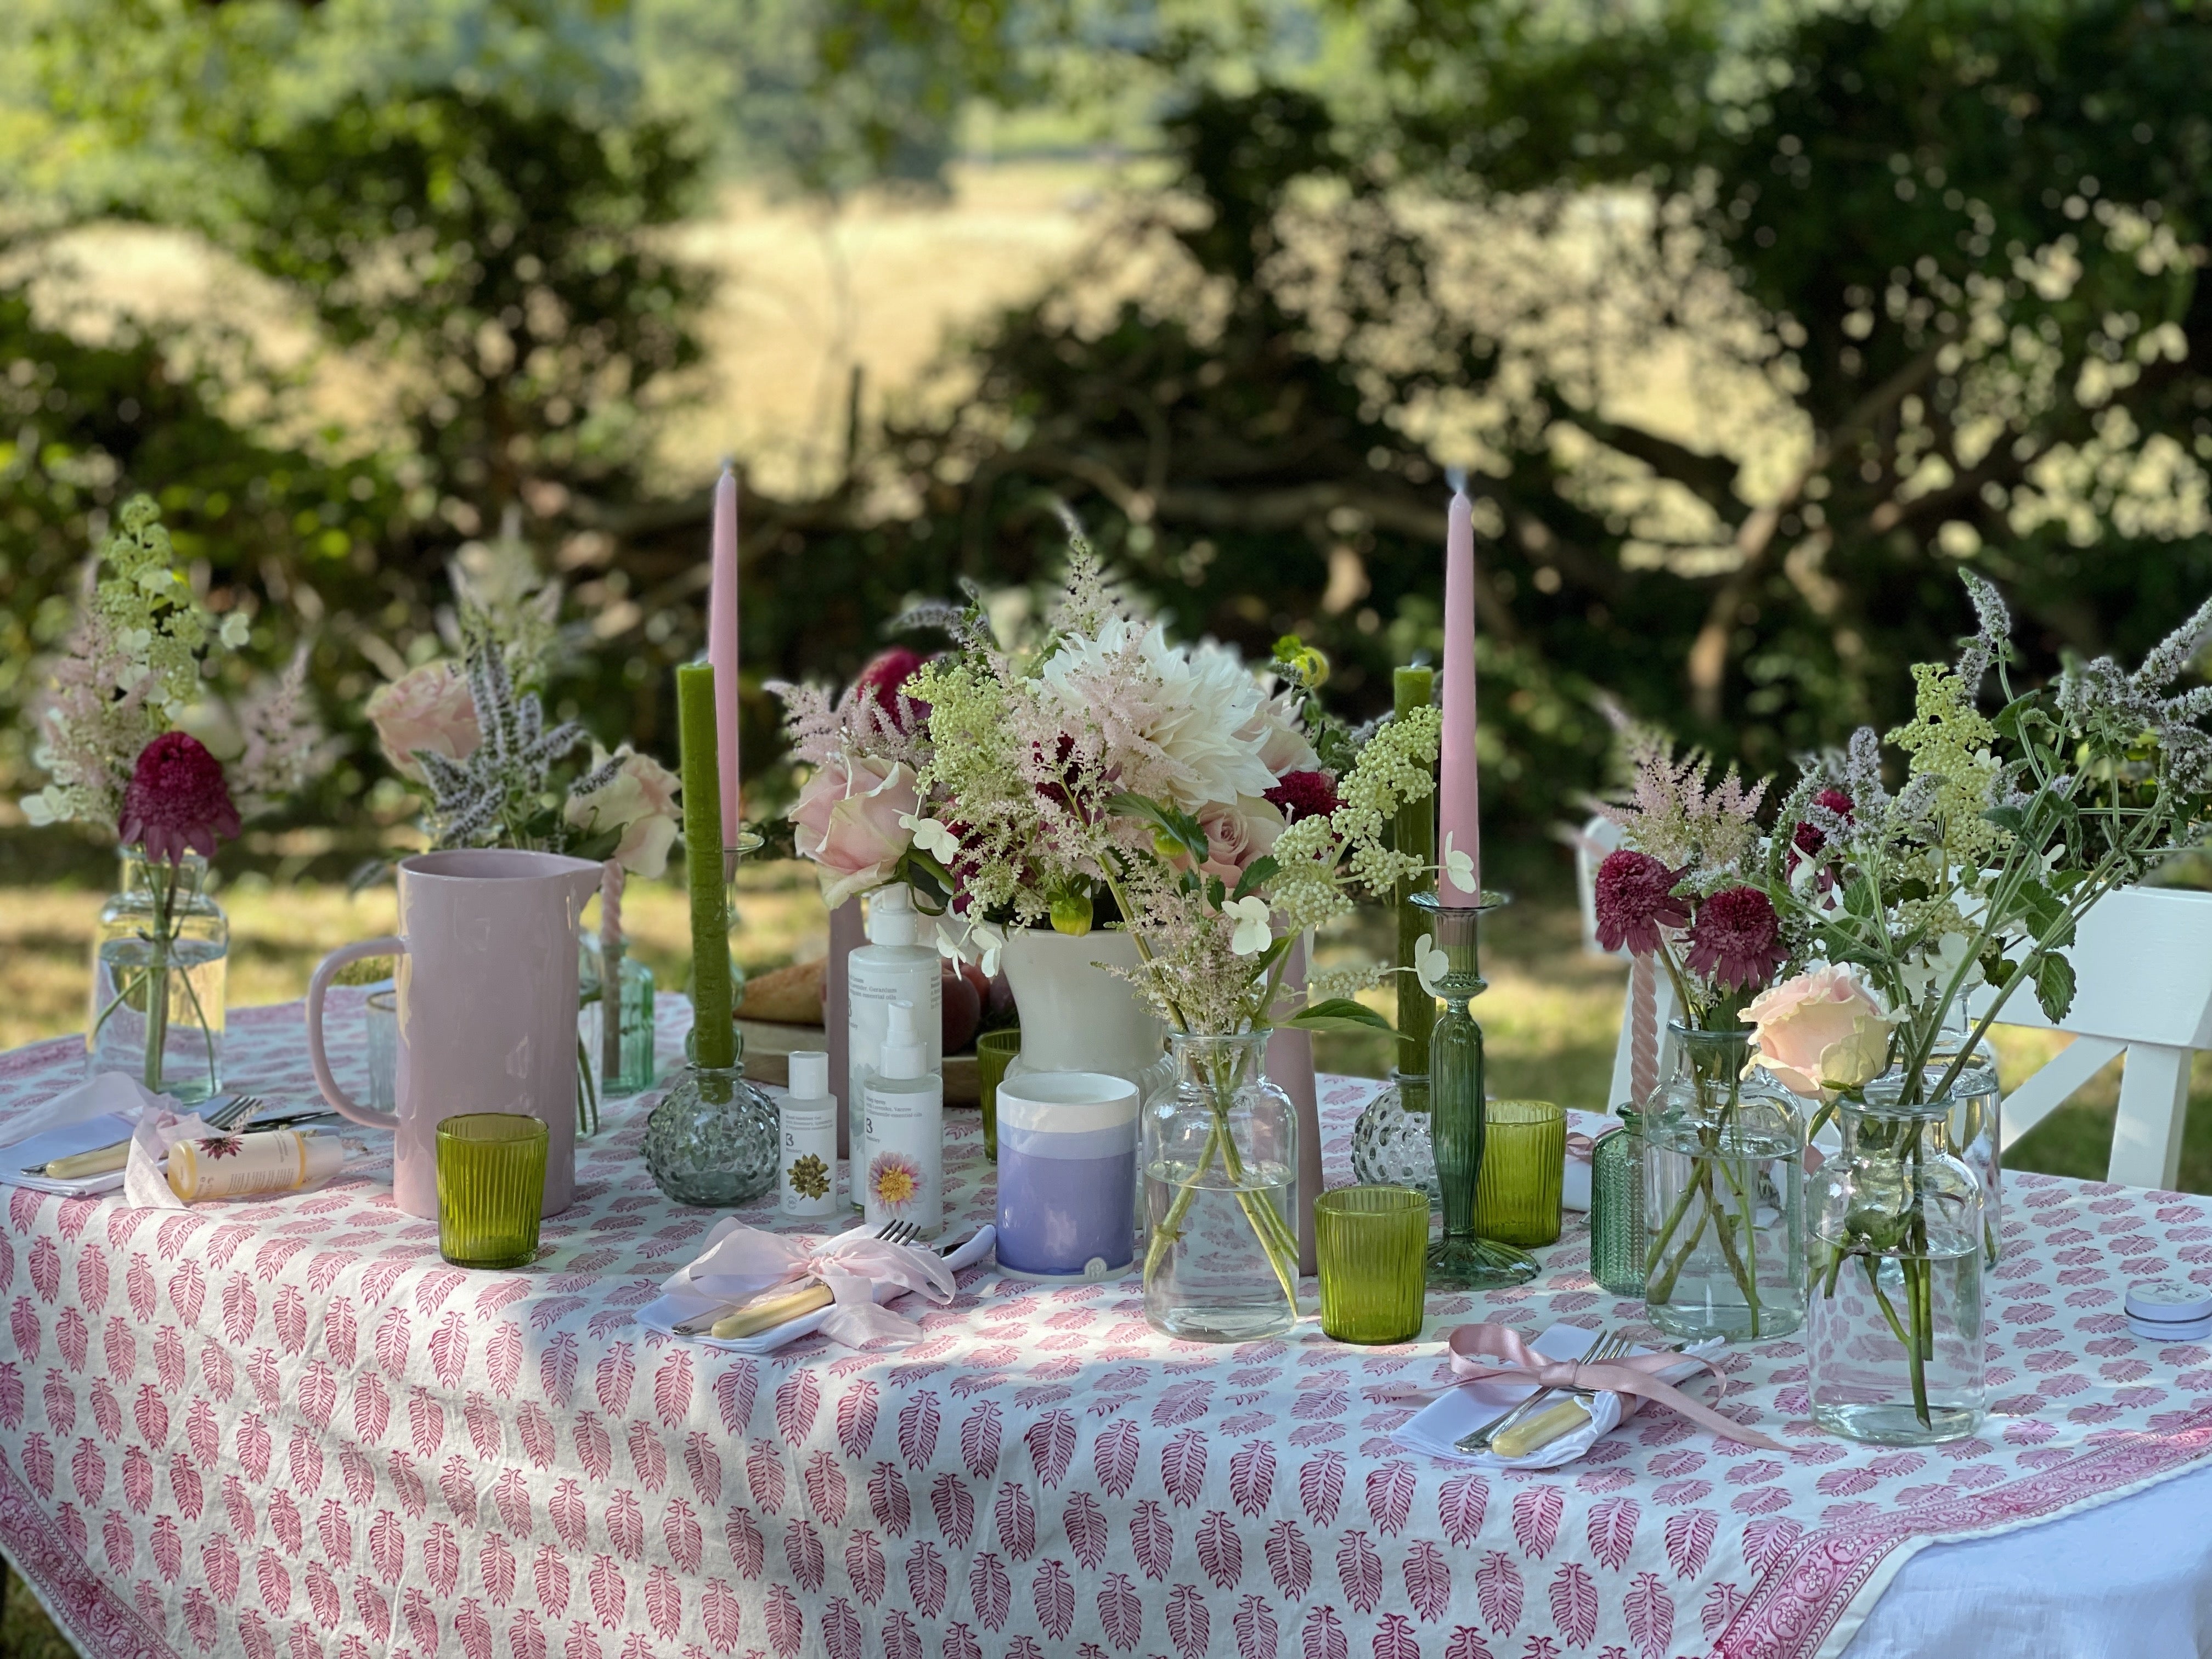 Creating a Floral Themed Tablescape with Pamplemousse – Bramley Products